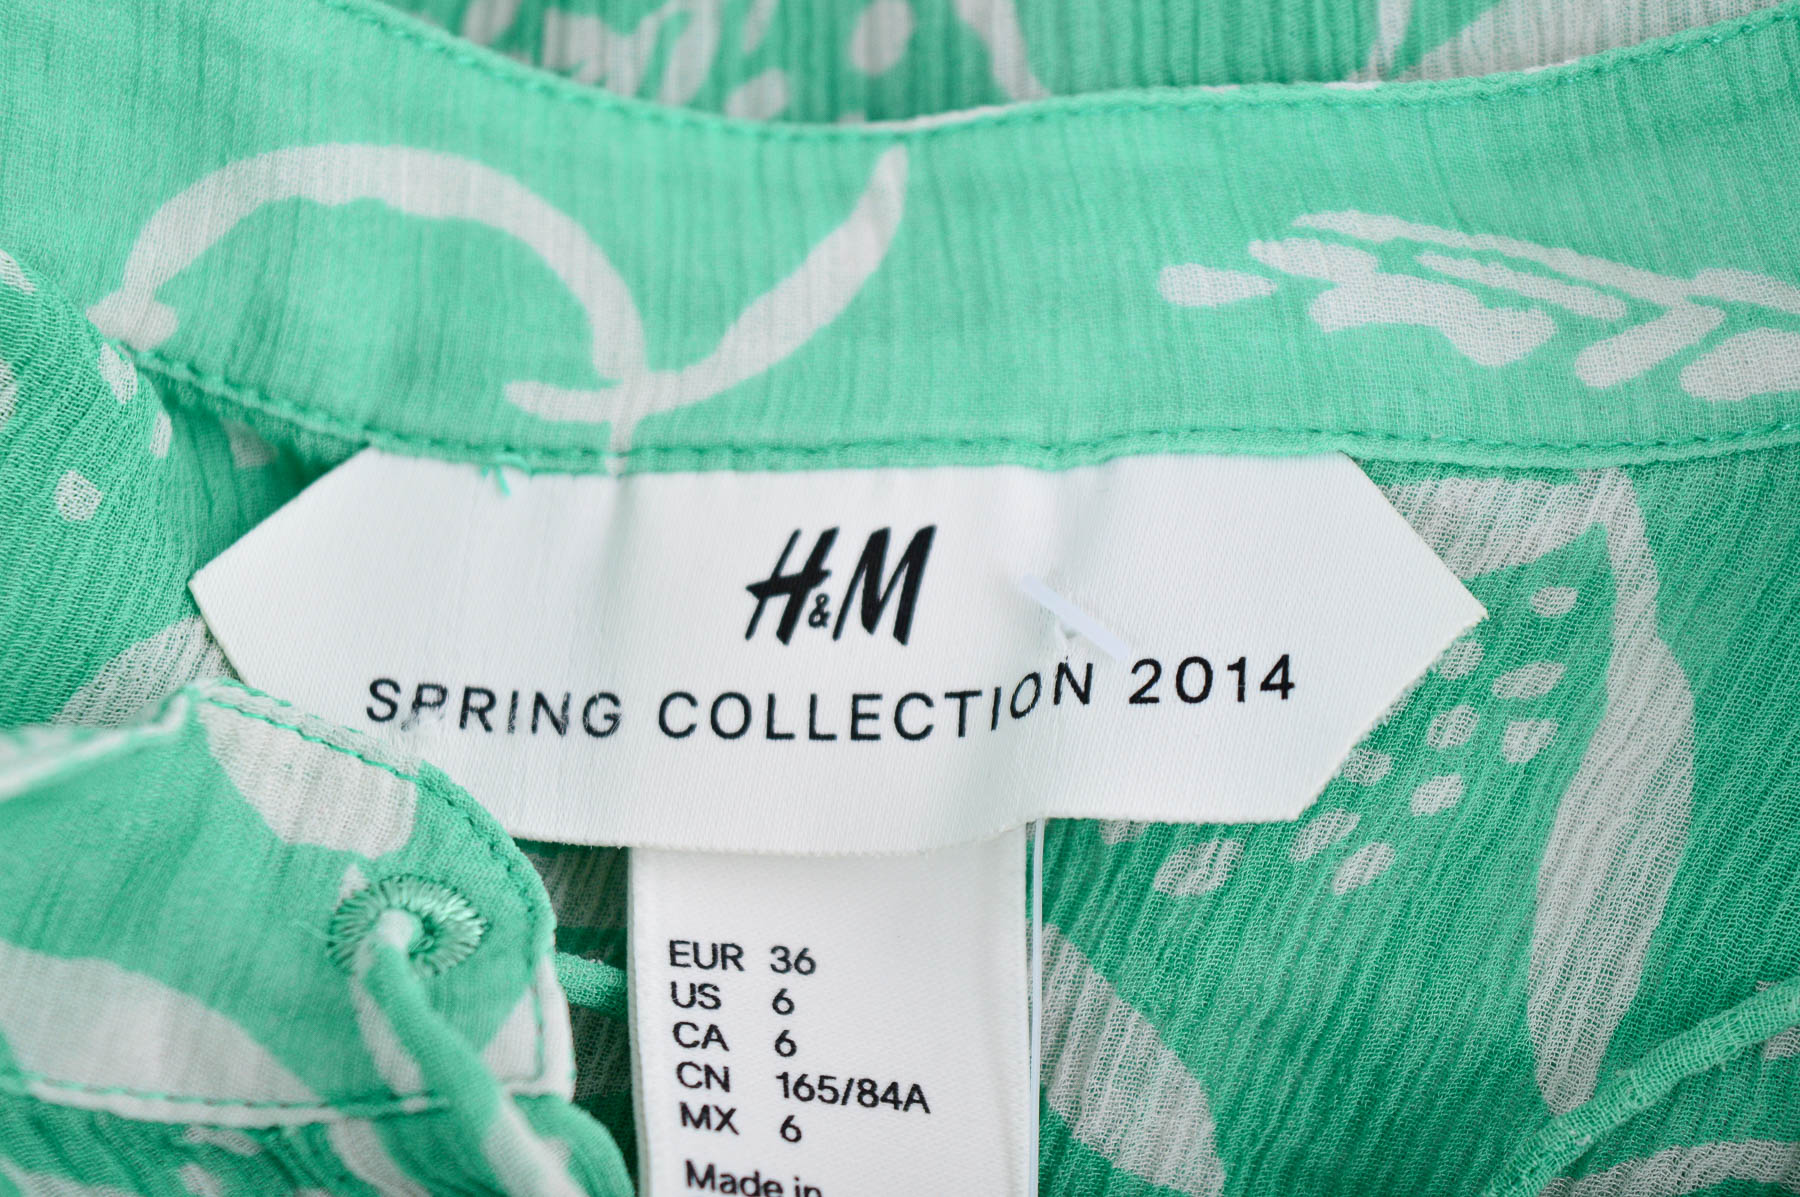 Women's shirt - H&M Spring Collection 2014 - 2